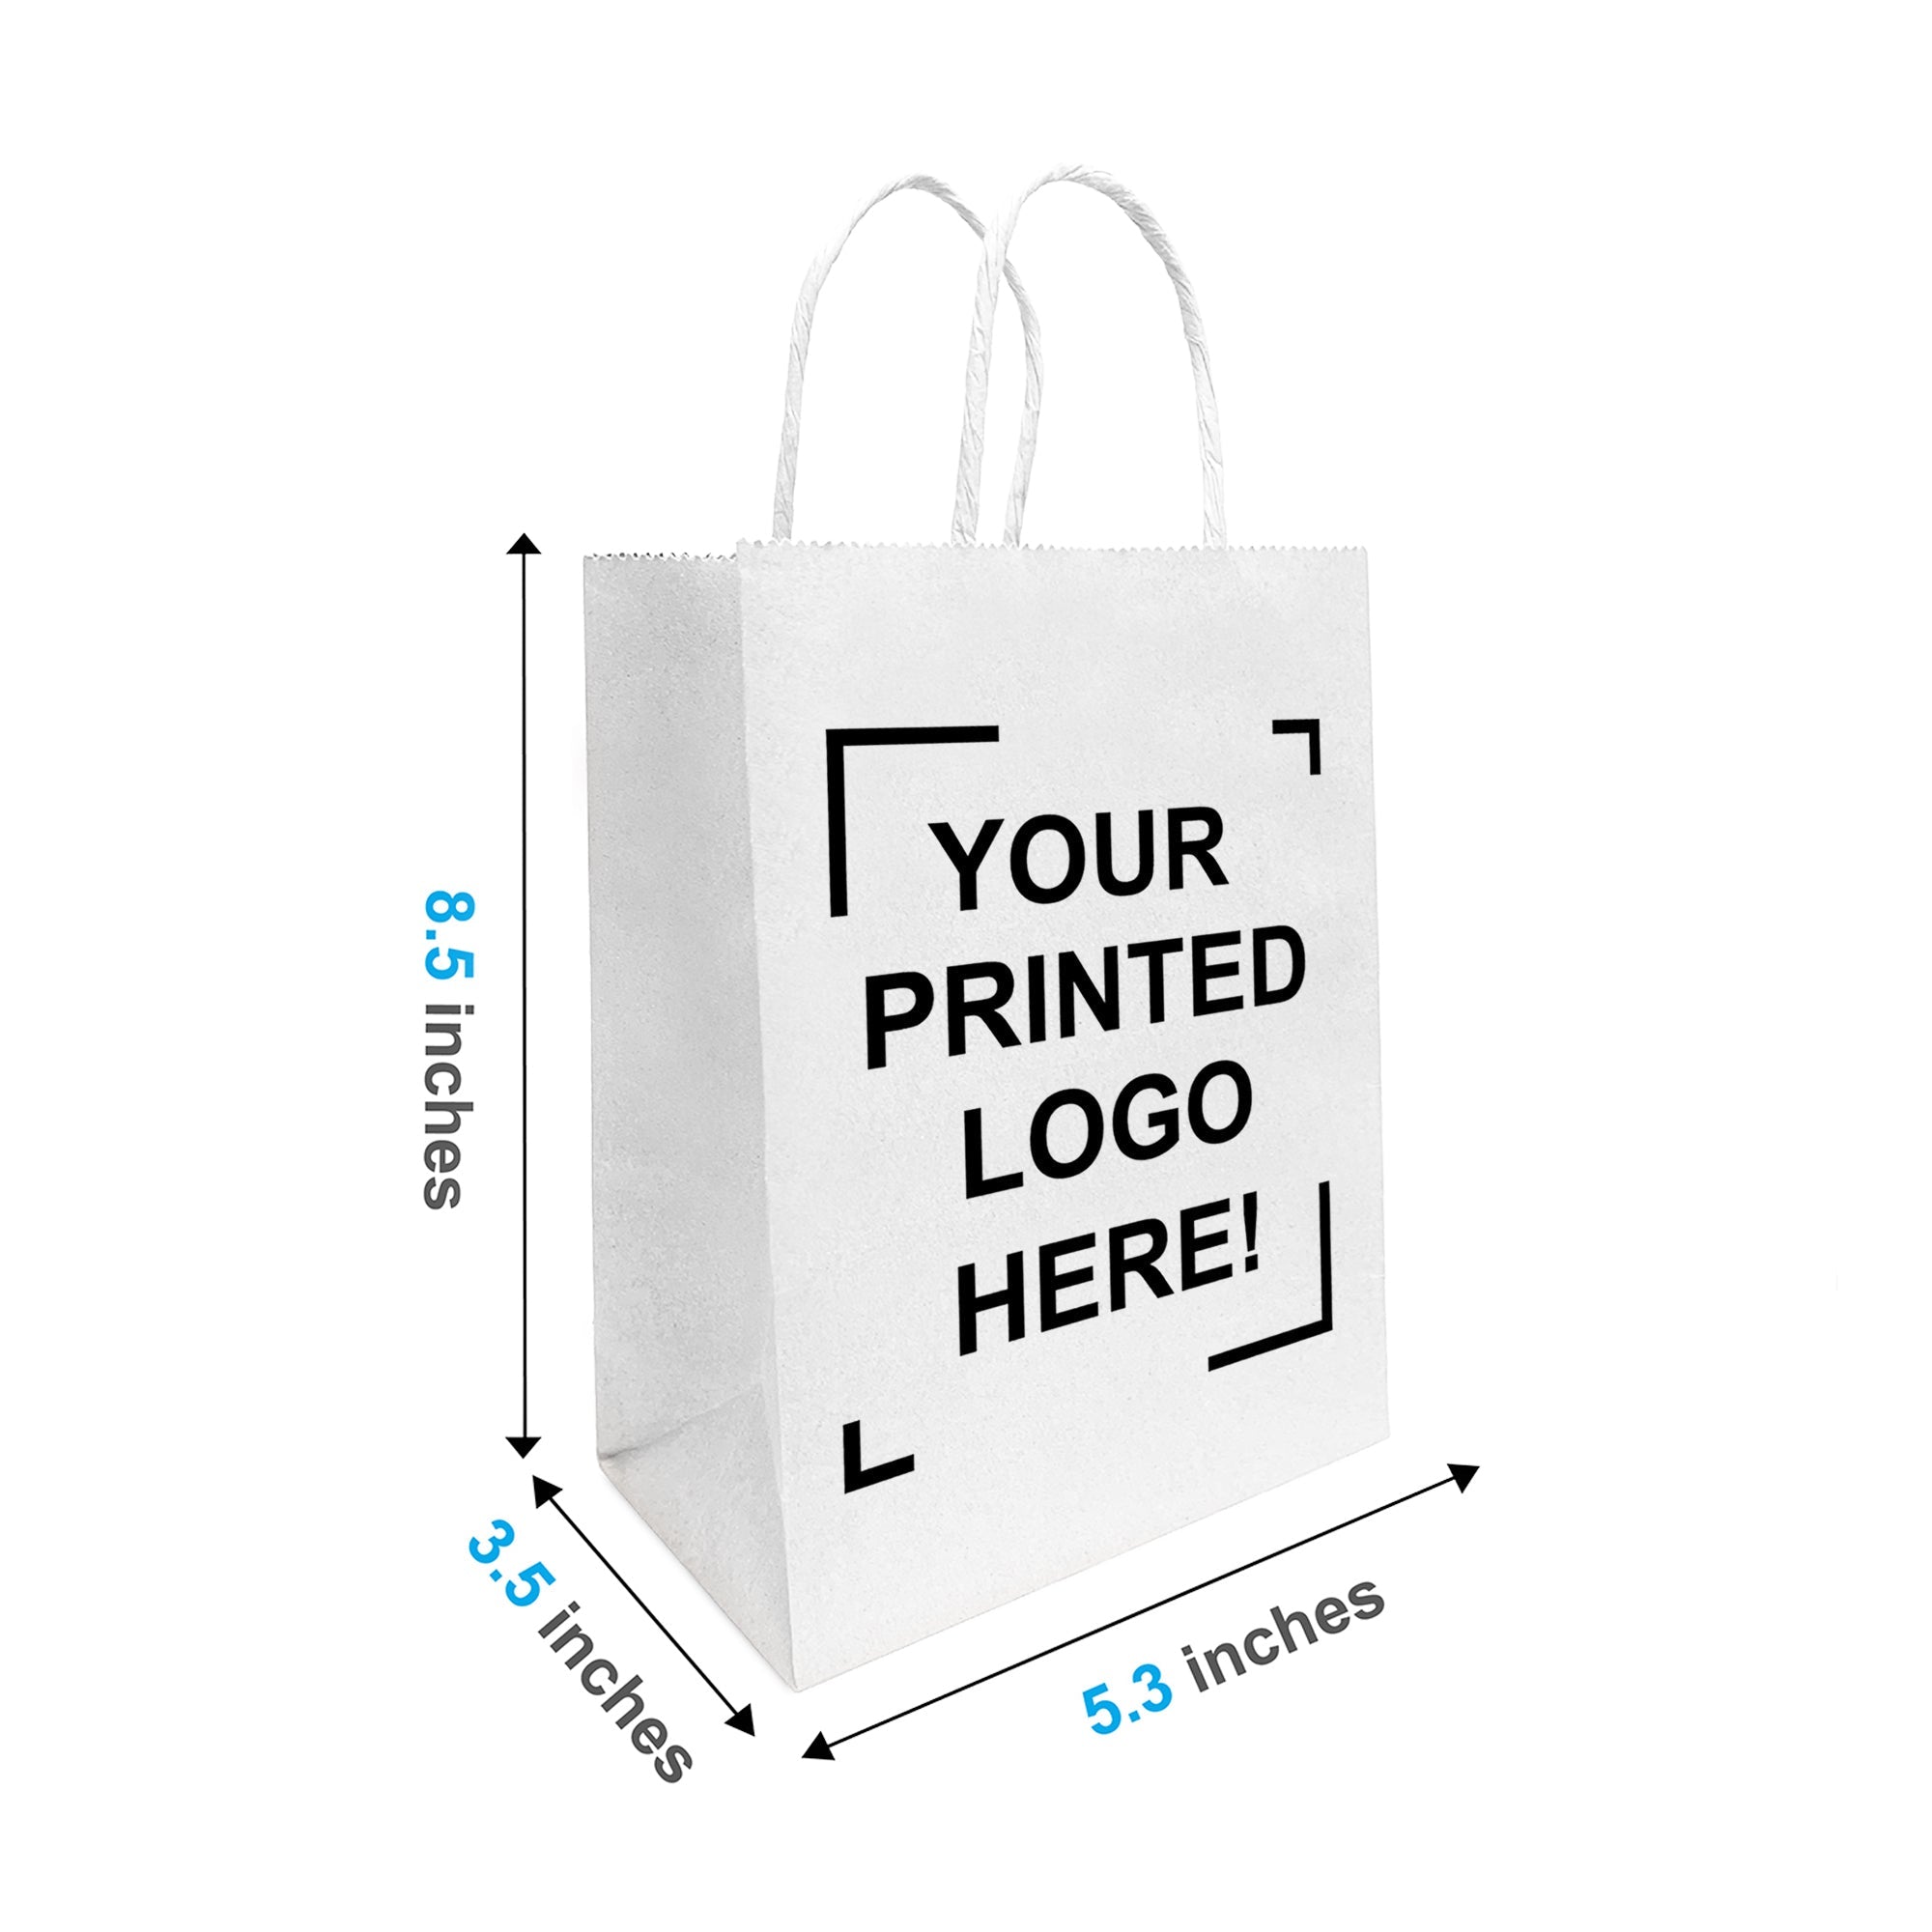 Why Custom Printed Plastic Bags Are Important for Your Business   Universal Plastic